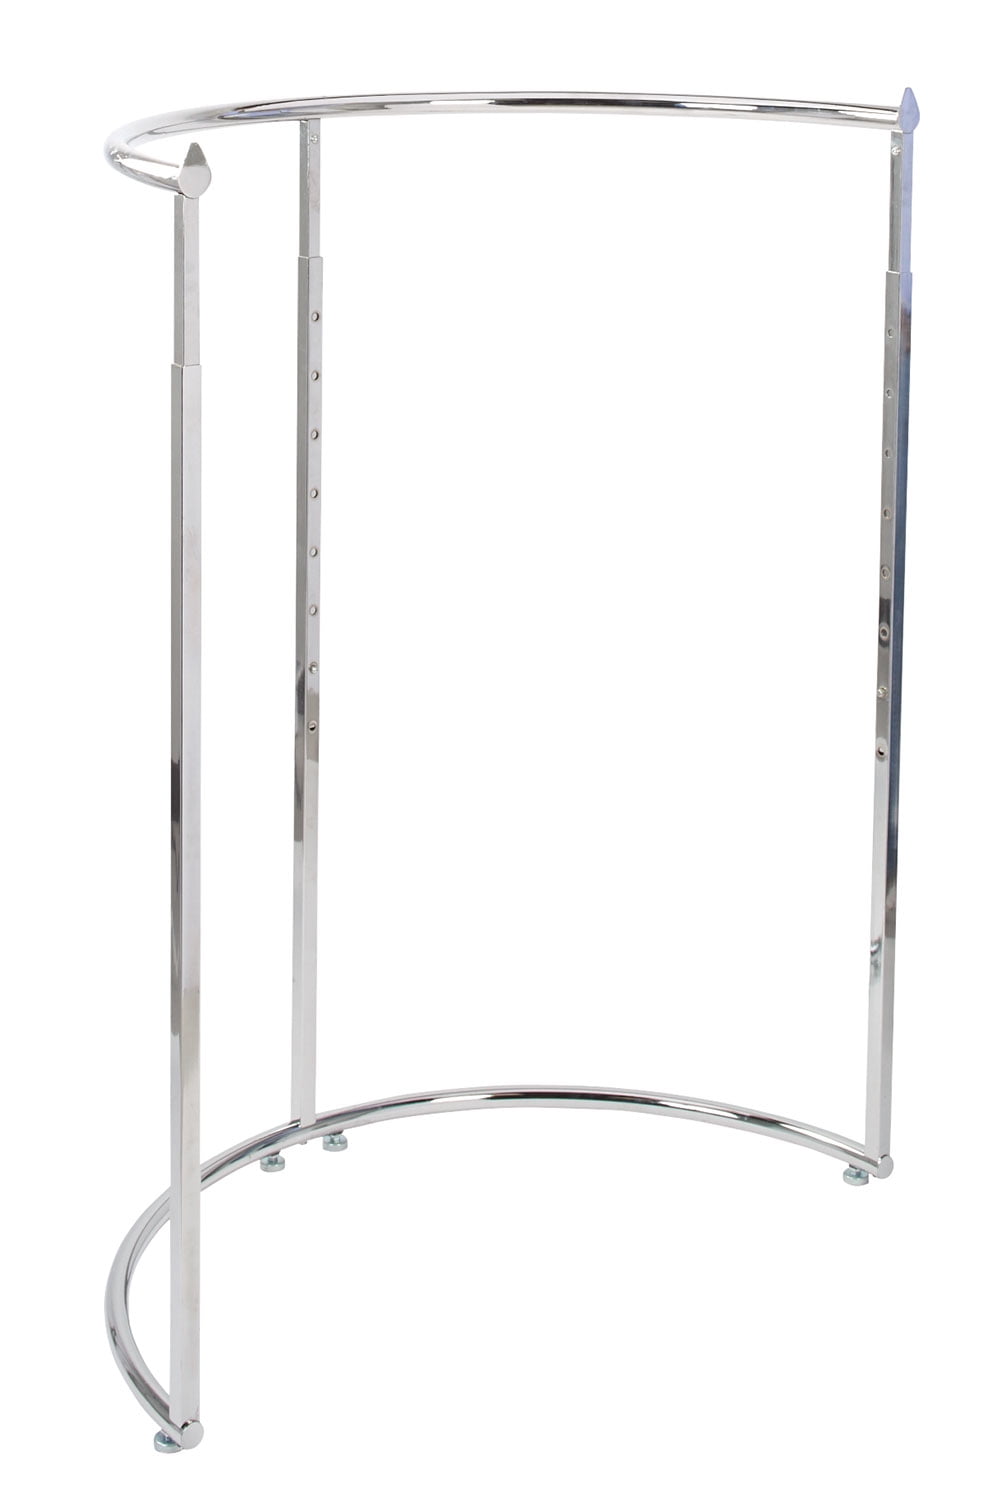 Half Round Clothing Rack Pipeline Collection Chrome Garment Adjustable 52 72" H 